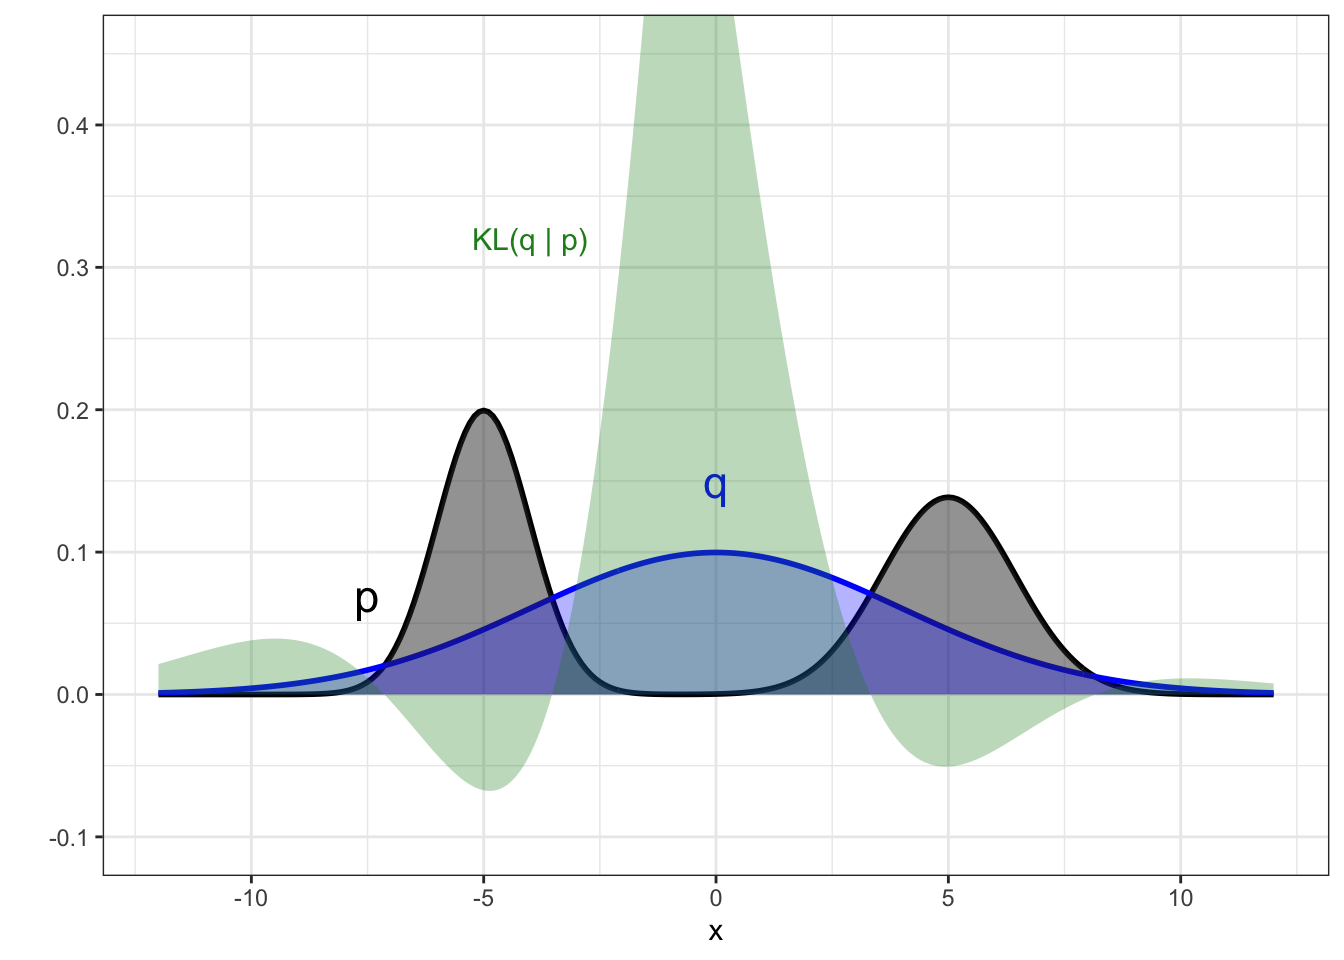 Example of the reverse KL divergence when the target posterior is multi-modal. Target posterior is shown in black, and the two panels show two alternative candidate distributions from a Gaussian family (blue). The contribution to the KL divergence is shown by the green region, with the KL figure itself being the area of this region.